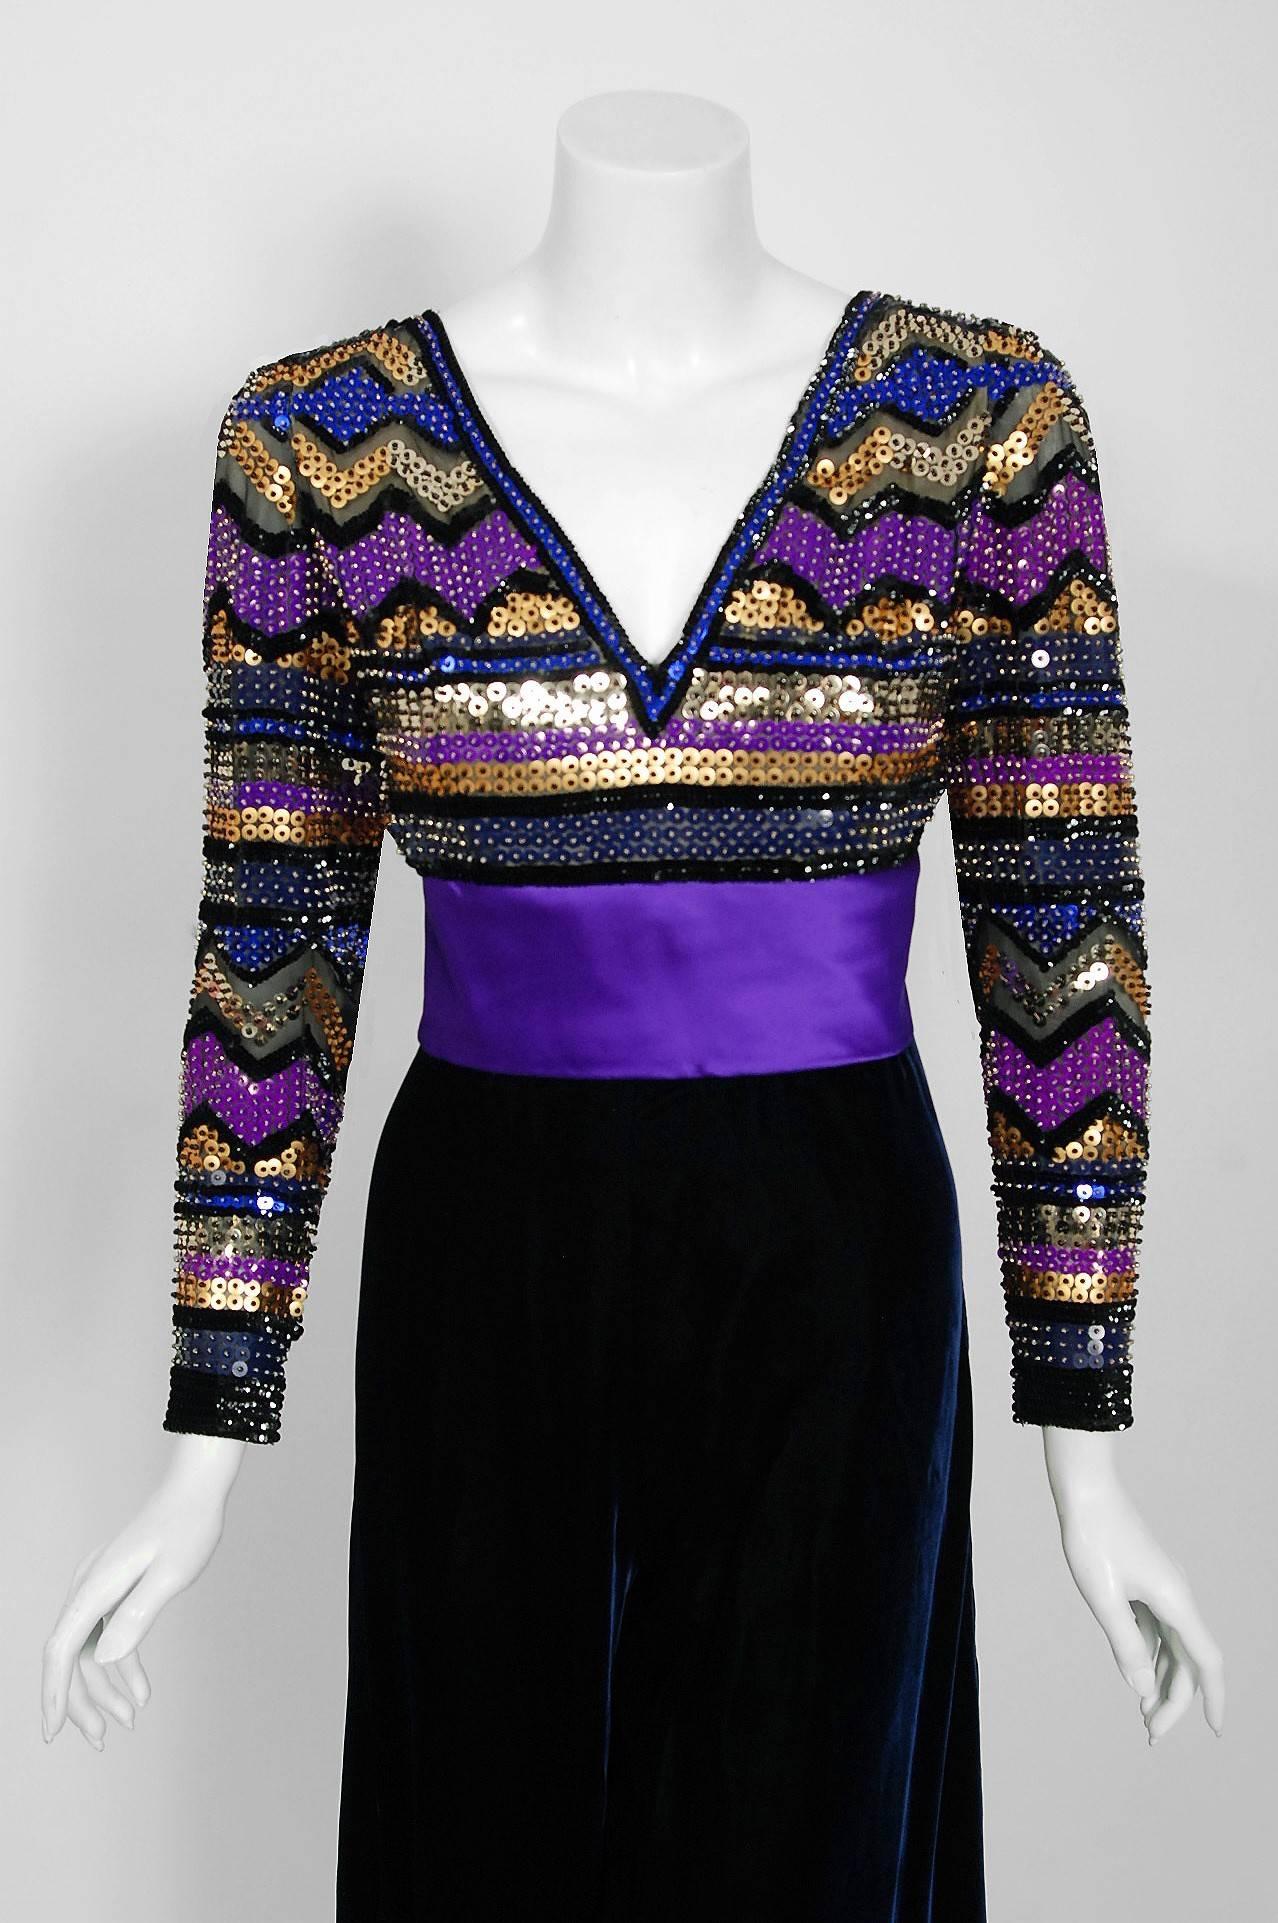 Exquisite Pierre Balmain Haute-Couture dark blue silk-velvet jumpsuit ensemble dating back to his opulent 1971 collection. This iconic designer created a very sculptural quality which was always allied with a ladylike essence. His garments have a